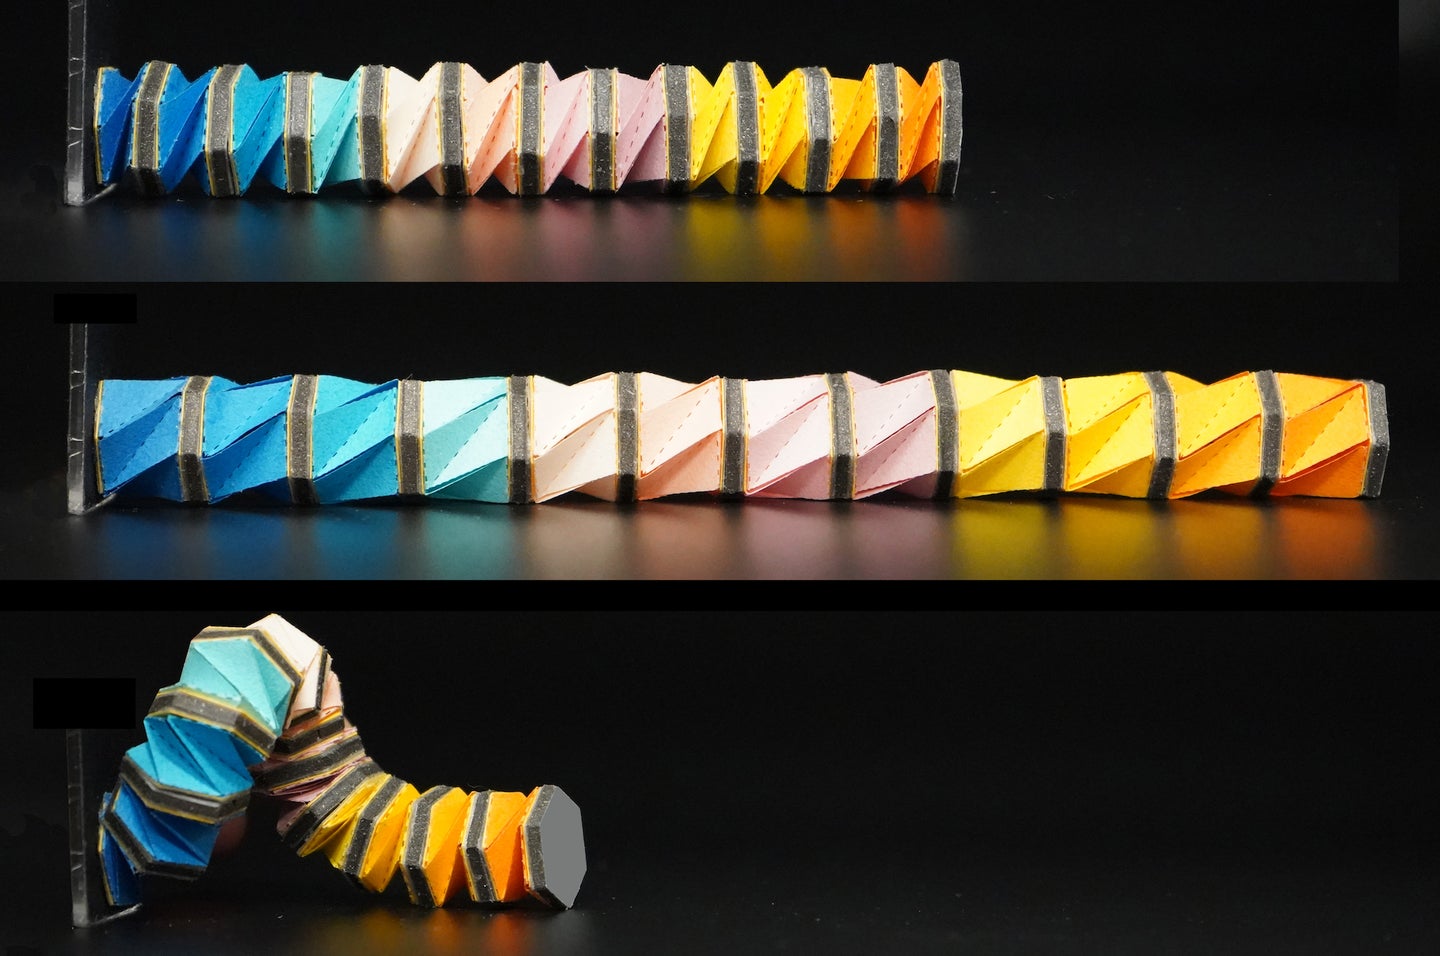 Origami and octopus inspired robo-arms could one day be used to navigate our body cavities.